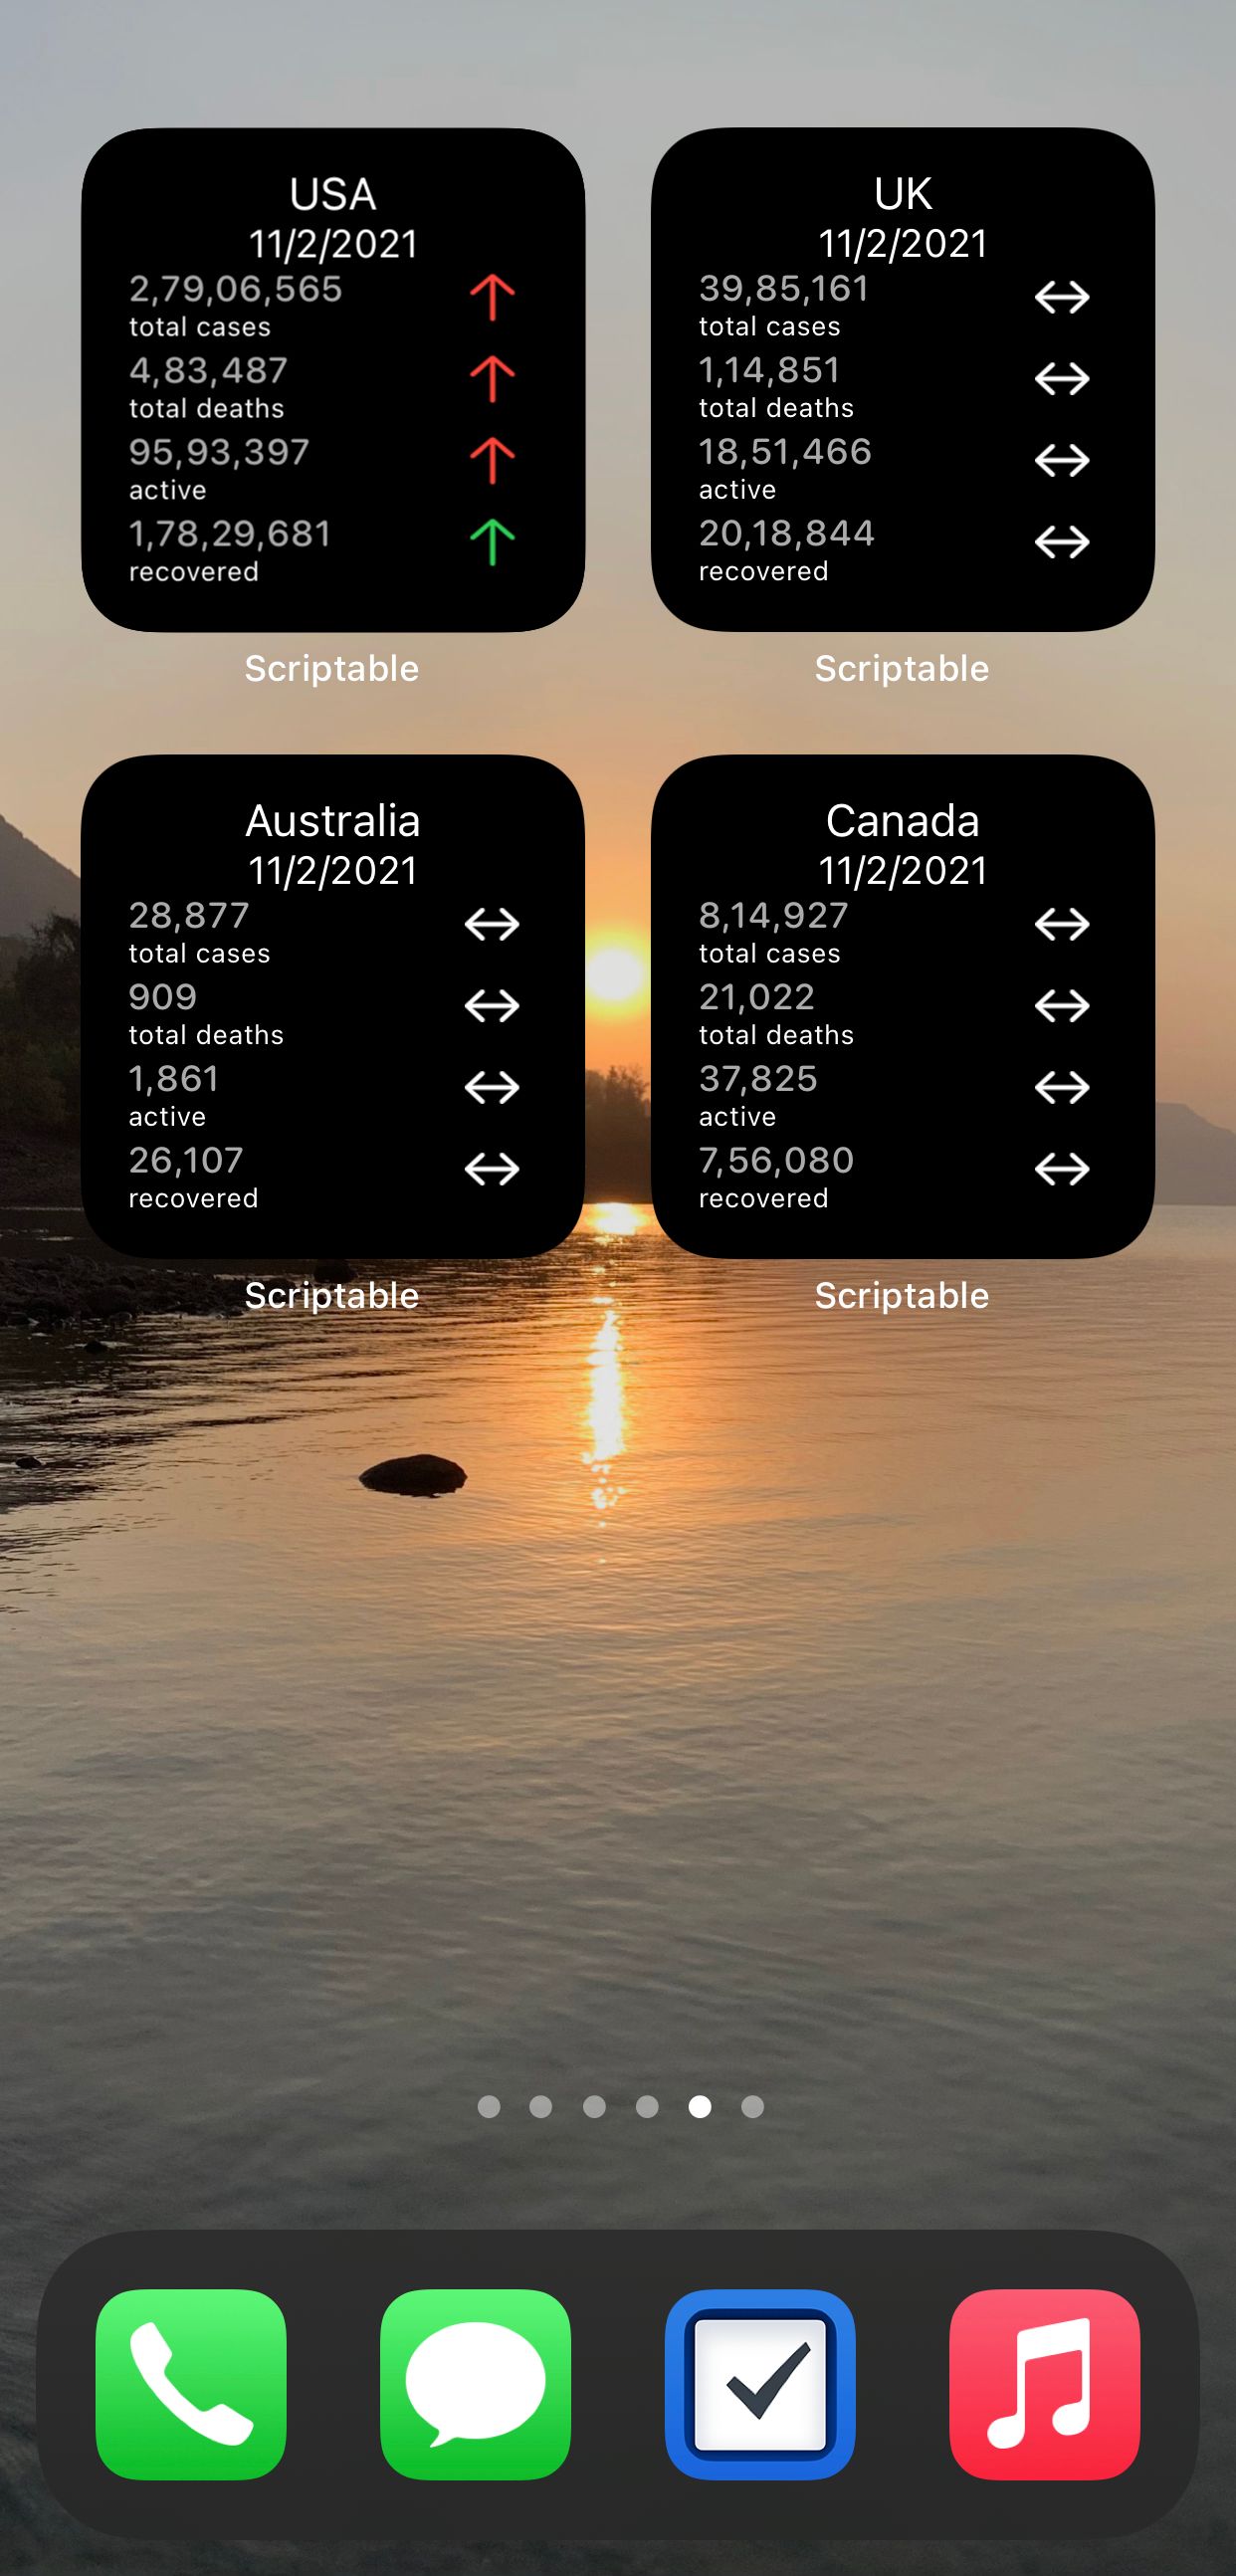 Covid-19 statistics for various countries, displayed via iOS 14 widgets